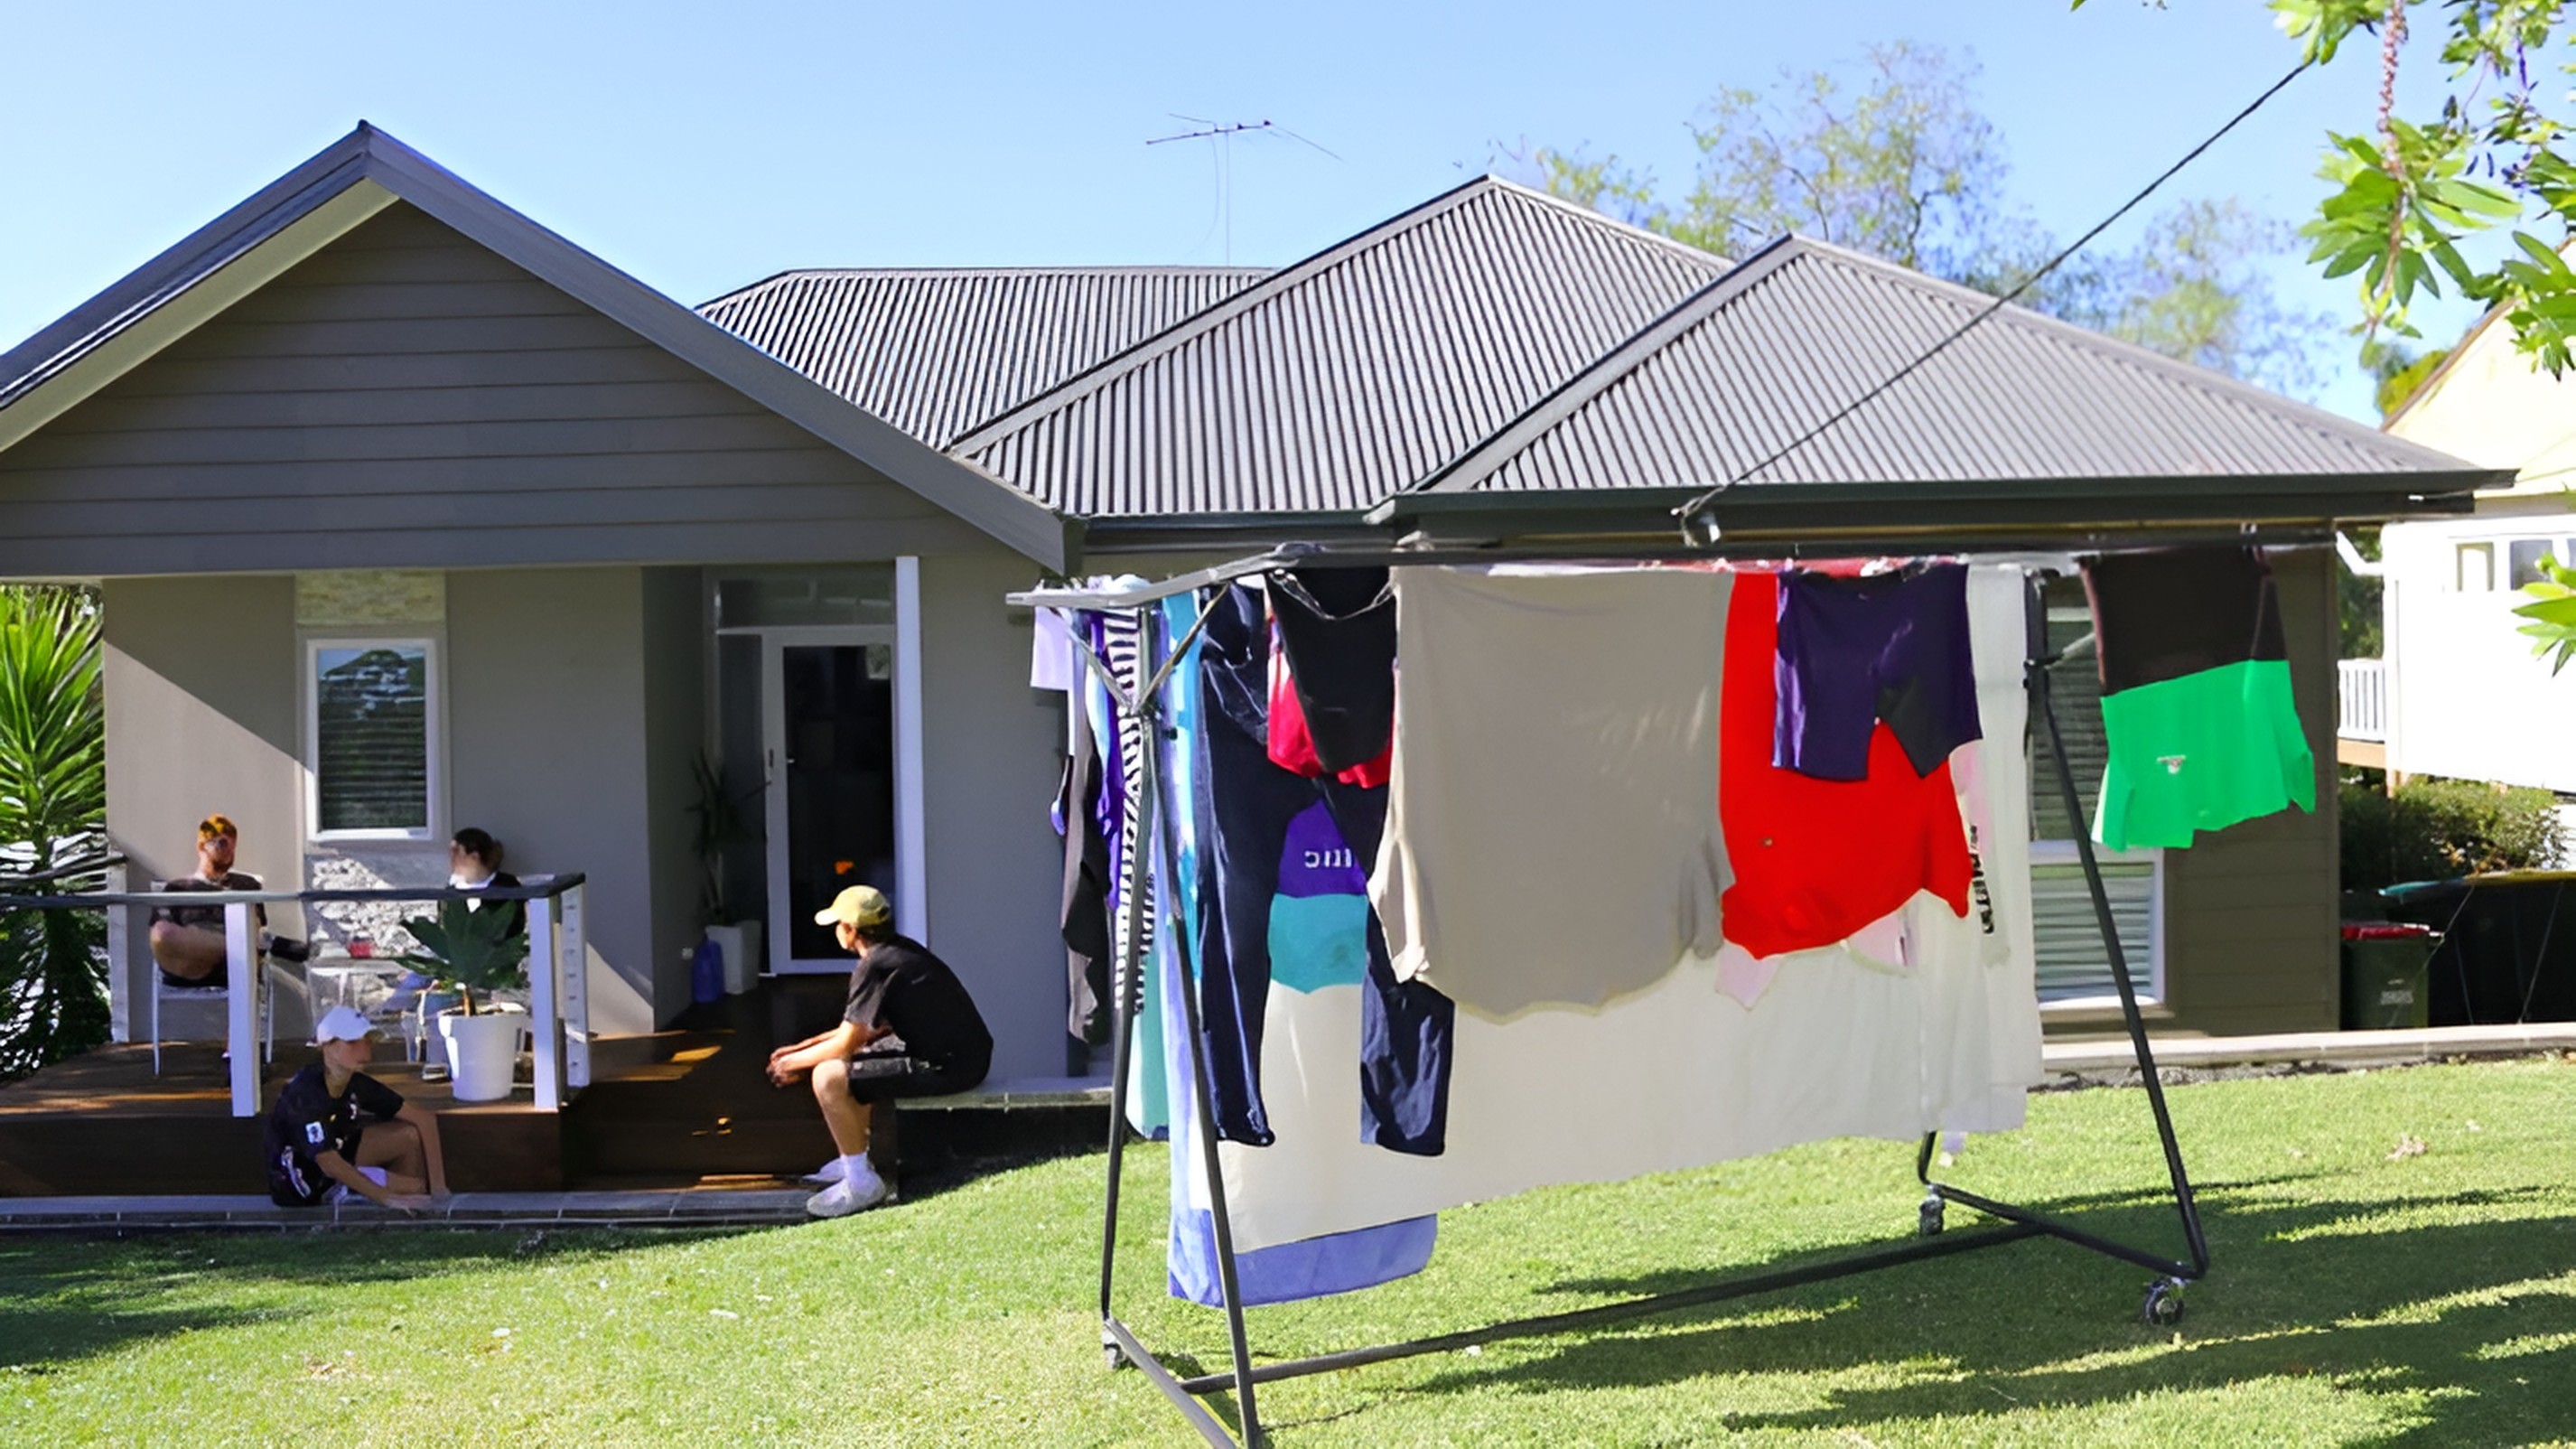 Laundry Hacks for Big Families Prioritise Hanging Clothes